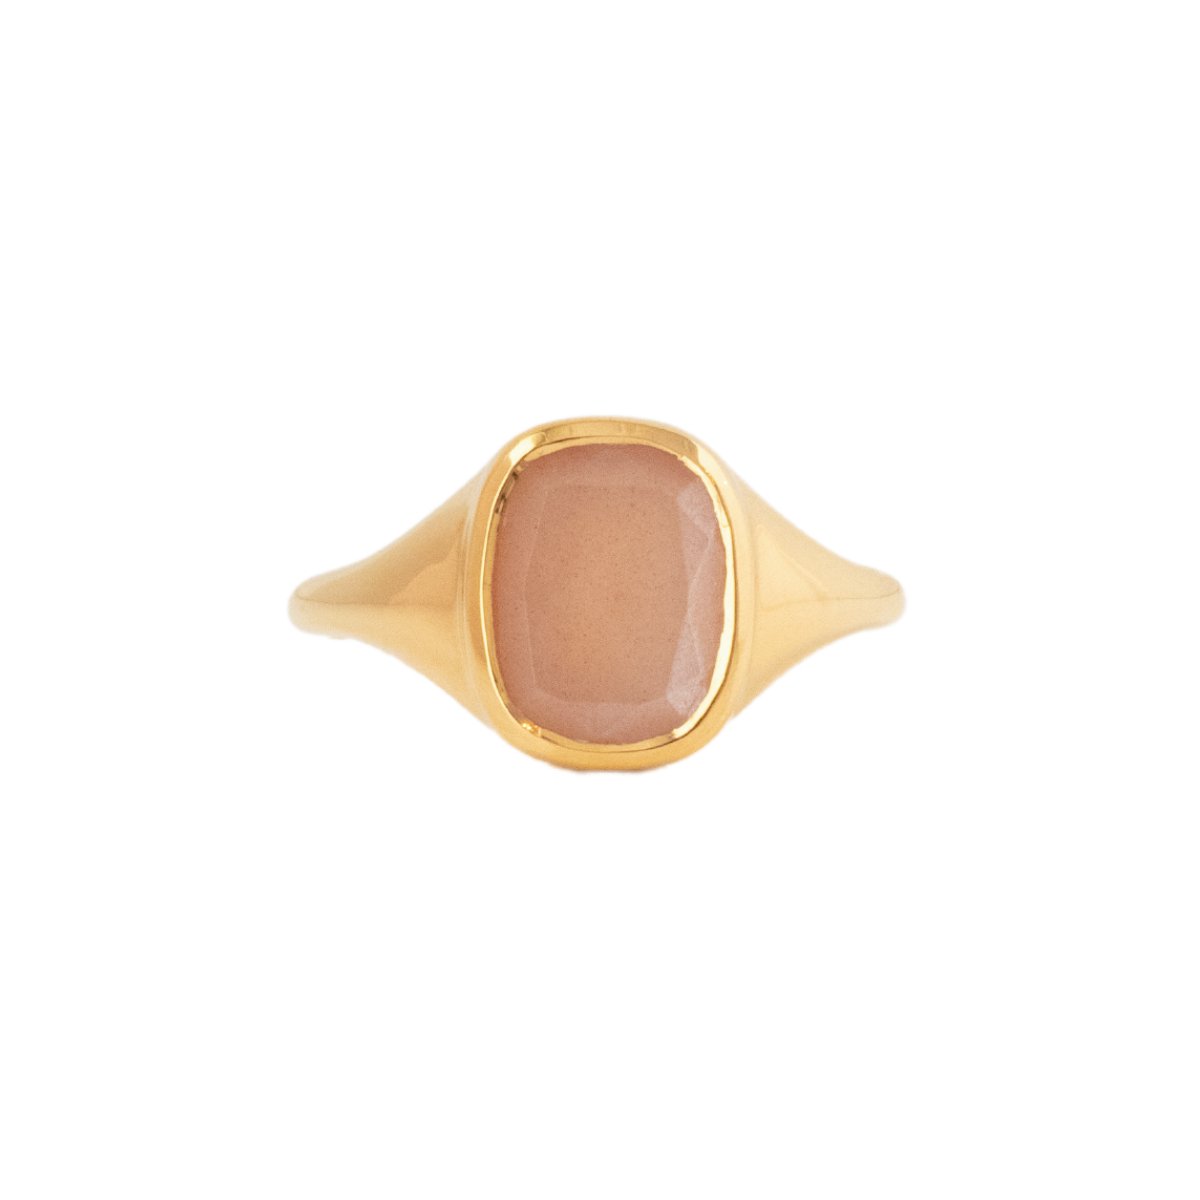 LOVE VINTAGE SIGNET RING - PEACH MOONSTONE & GOLD - SO PRETTY CARA COTTER